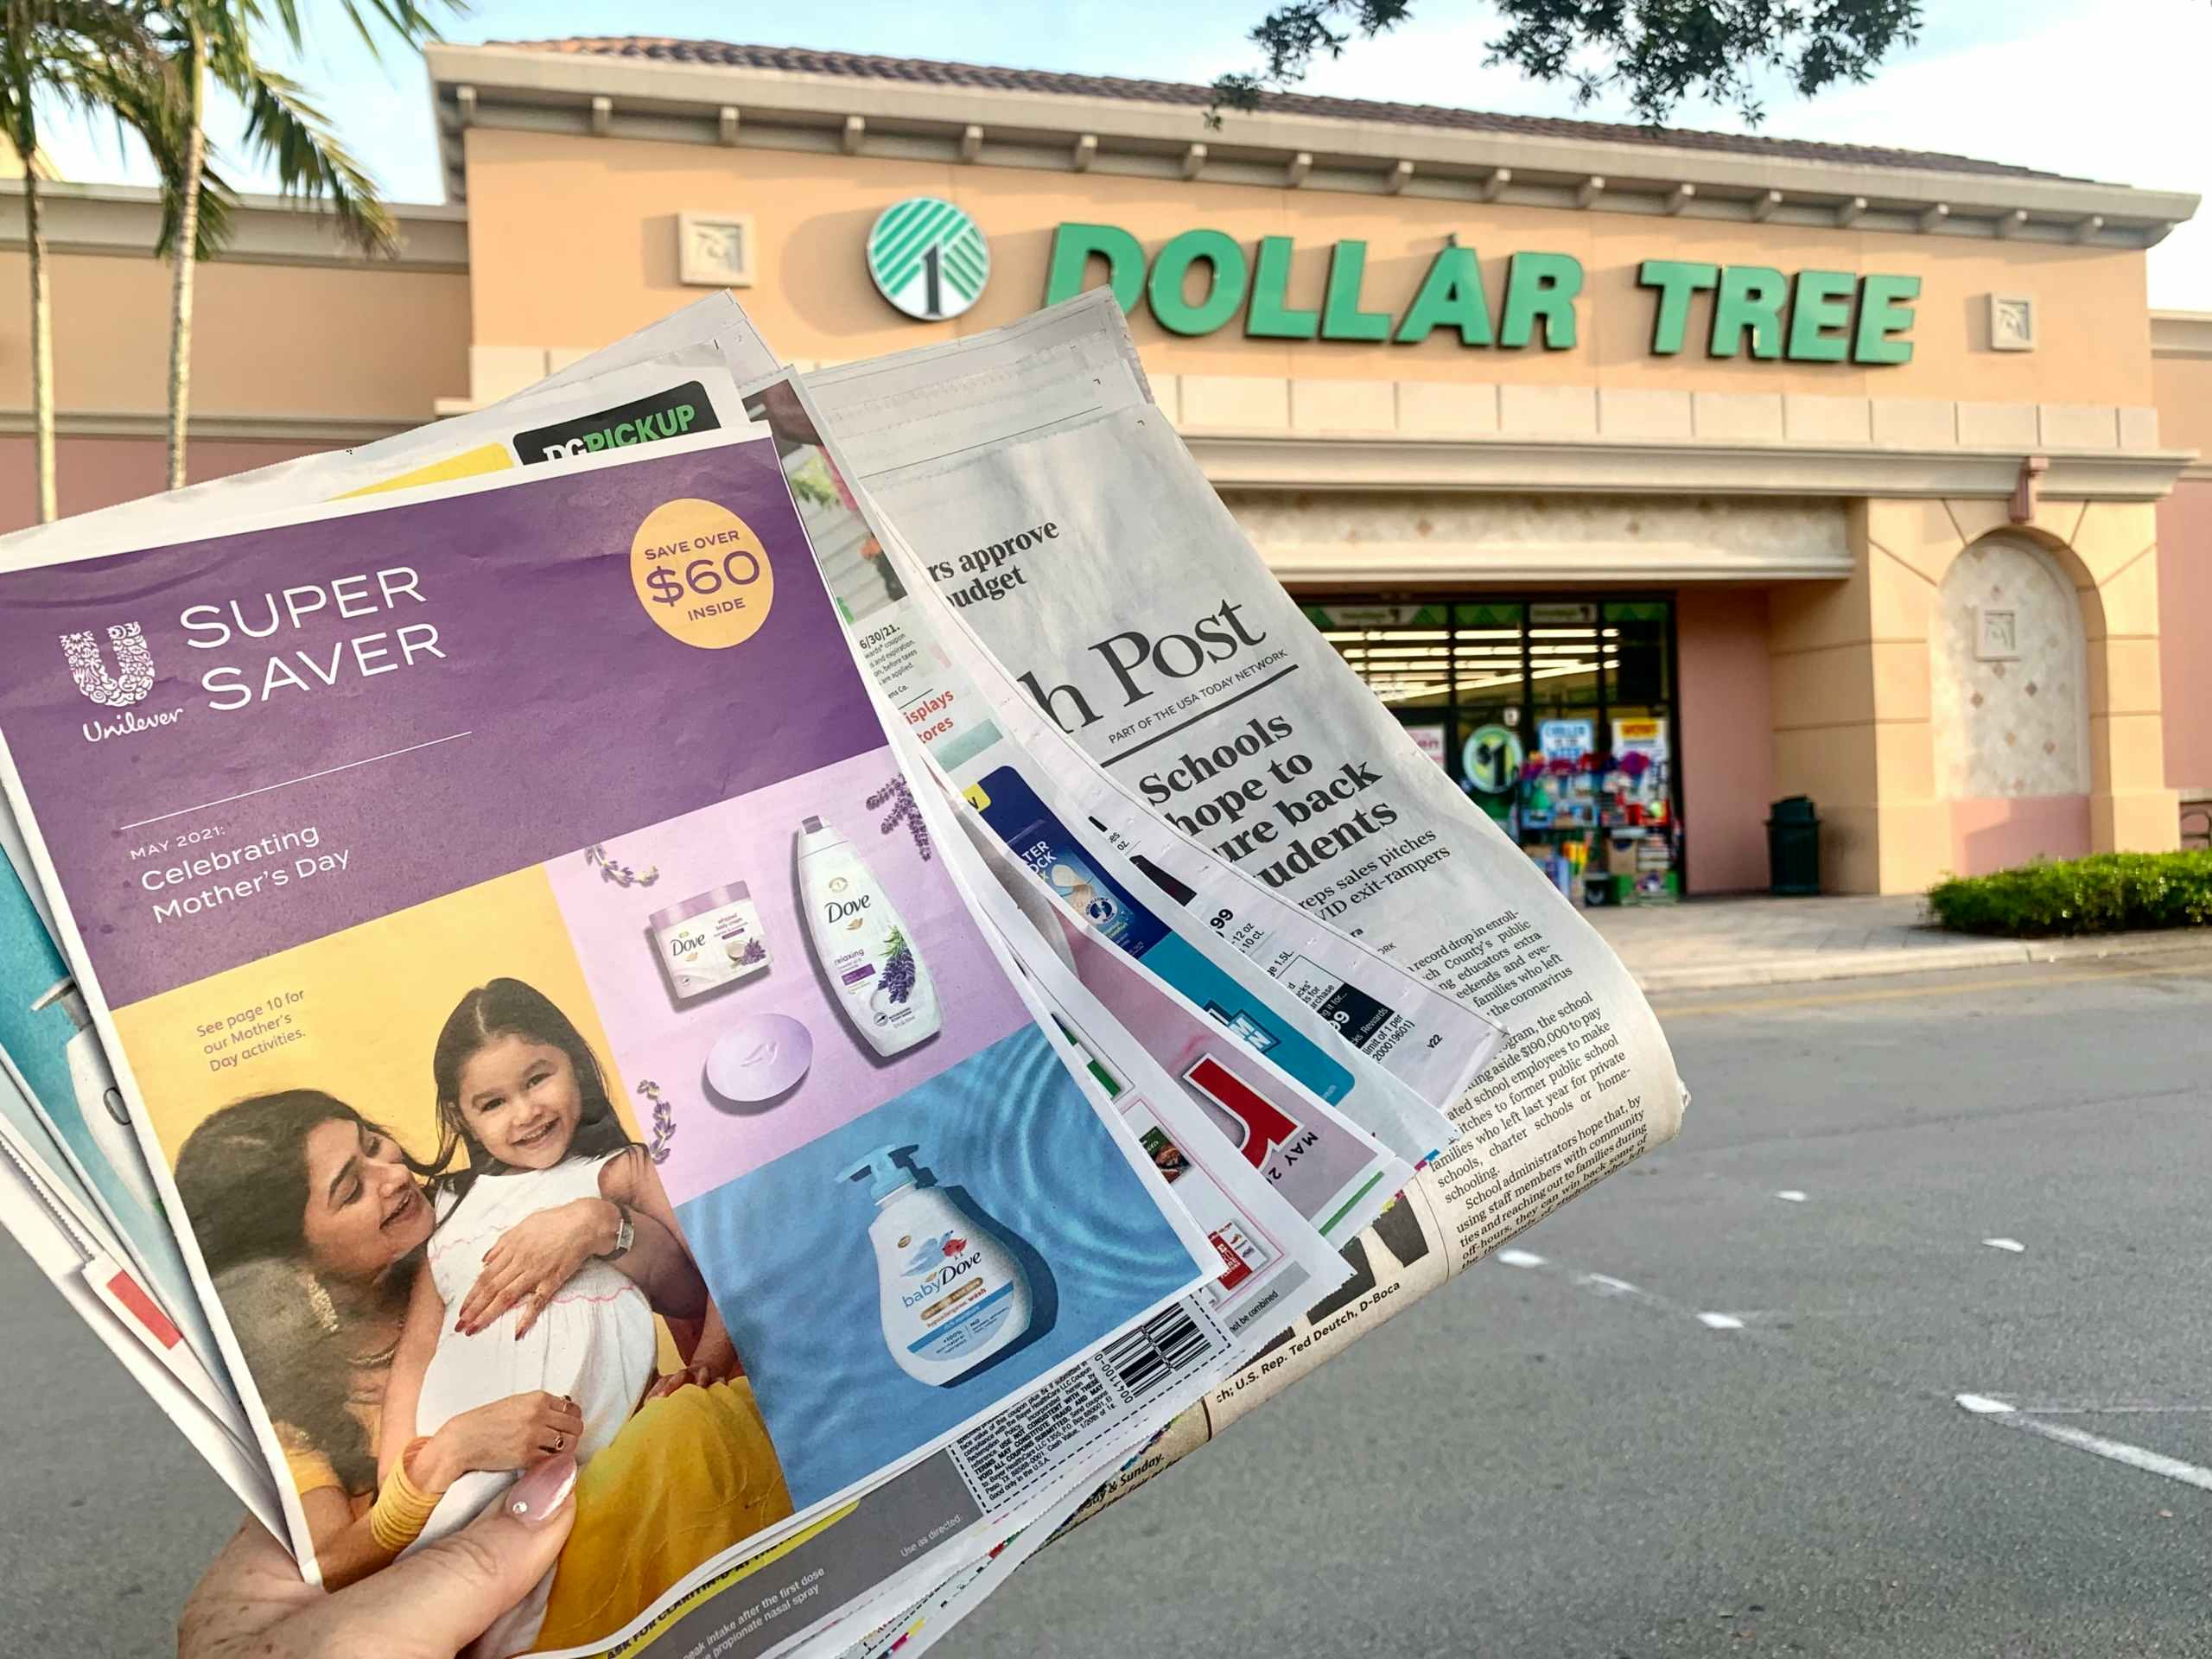 A person’s hand holding a stack of coupon leaflets and a newspaper in front of a Dollar Tree storefront.